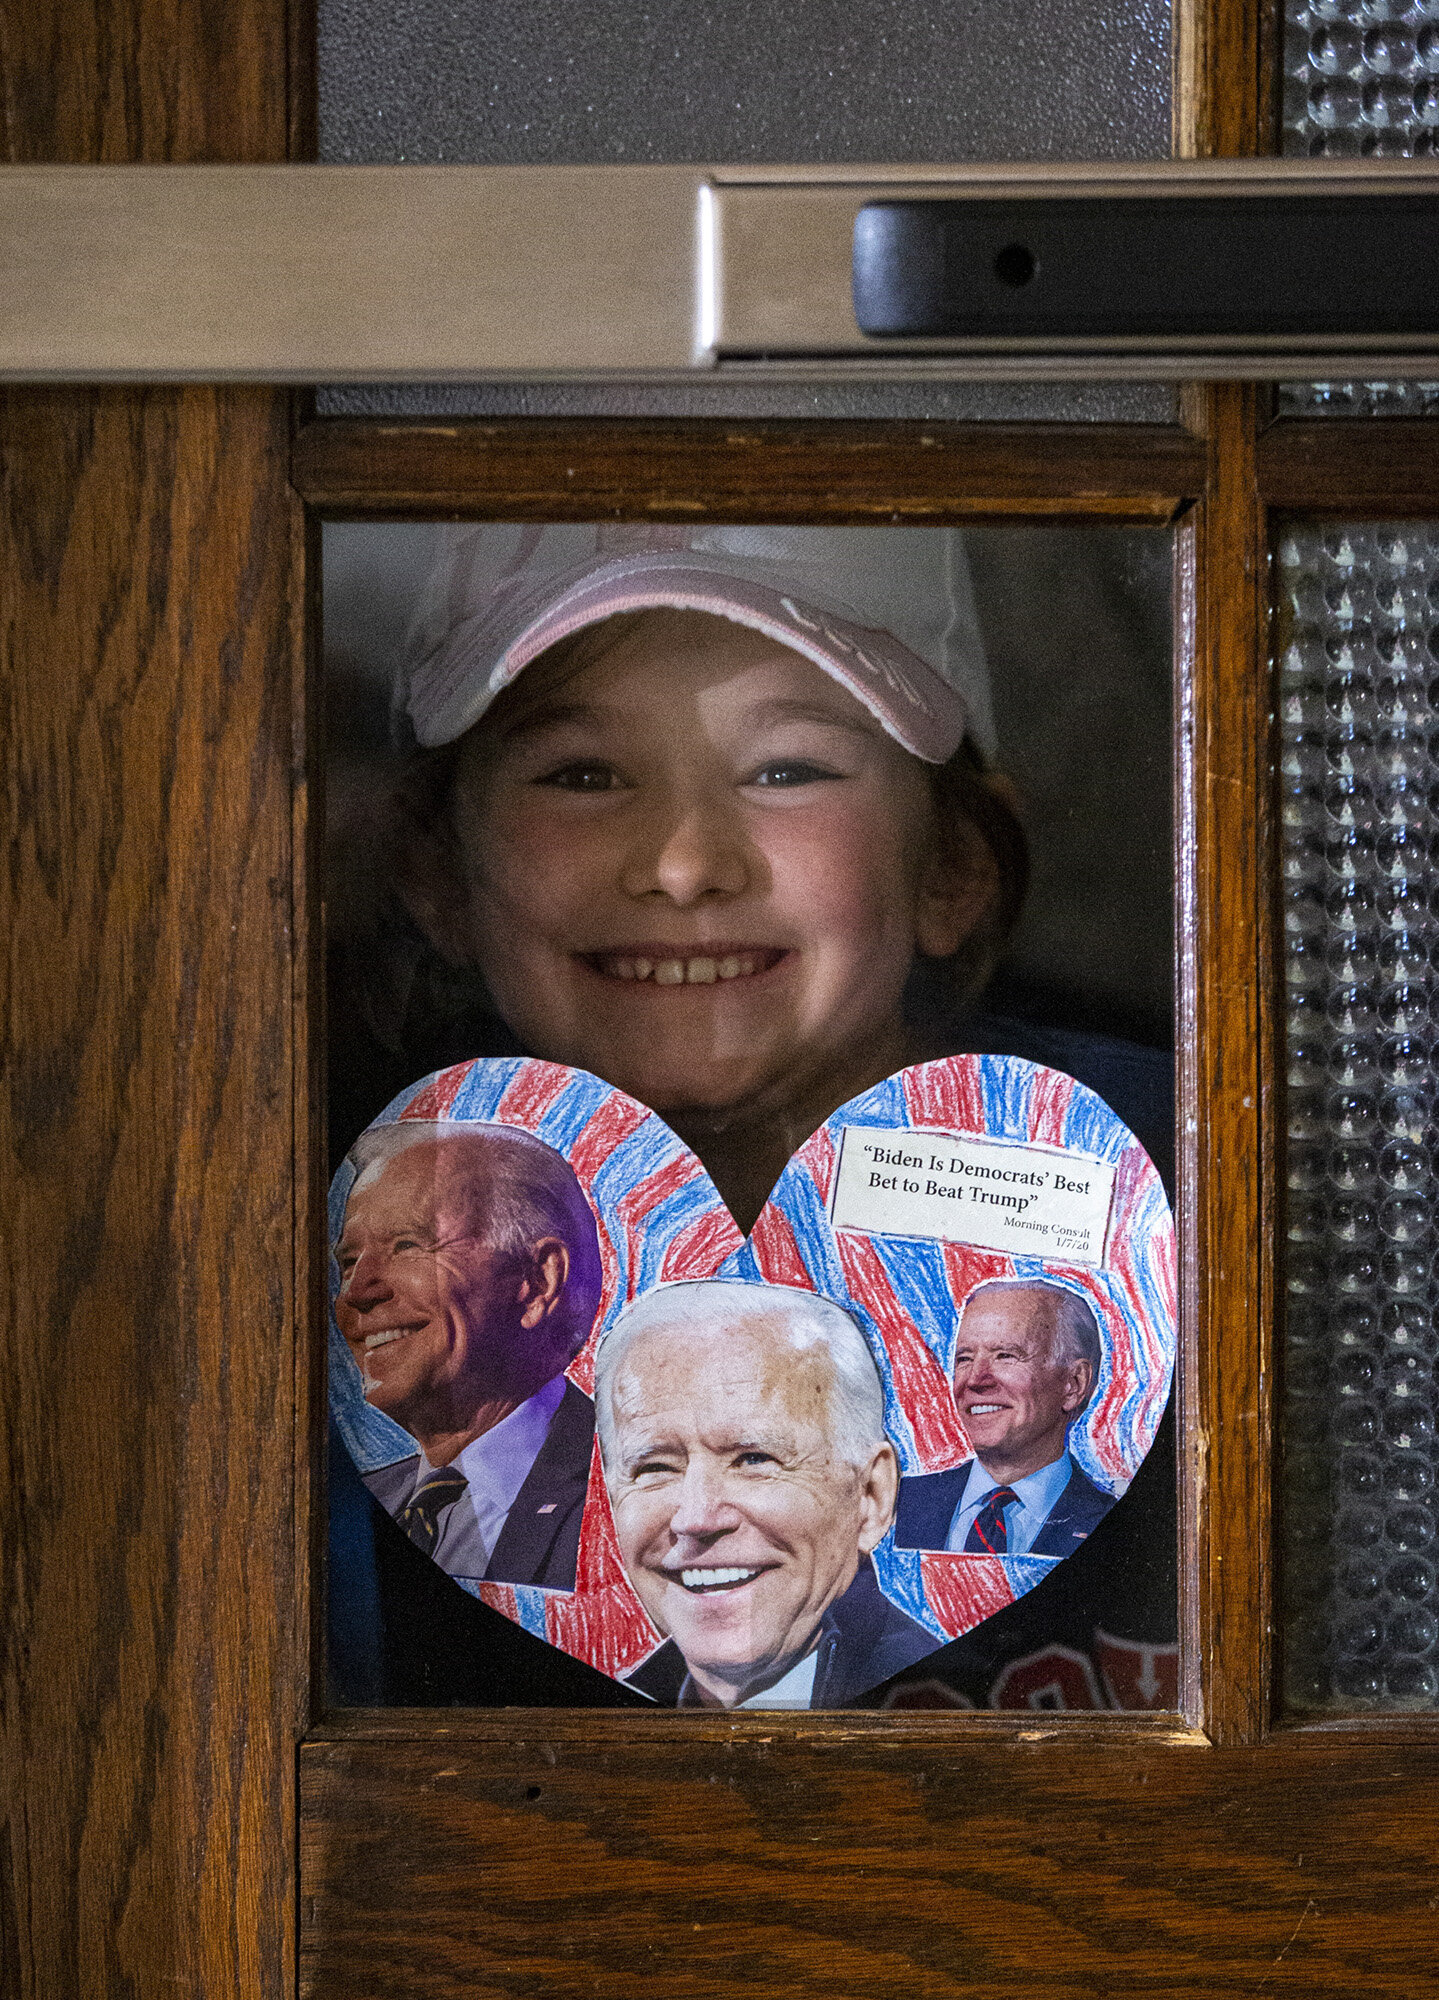  Lila MacInnis-Baumert, 9, of Iowa City holds up a sign she made earlier in the morning at the kitchen table while waiting to be let in the room to see Democratic presidential candidate former Vice President Joe Biden speak during a community event a